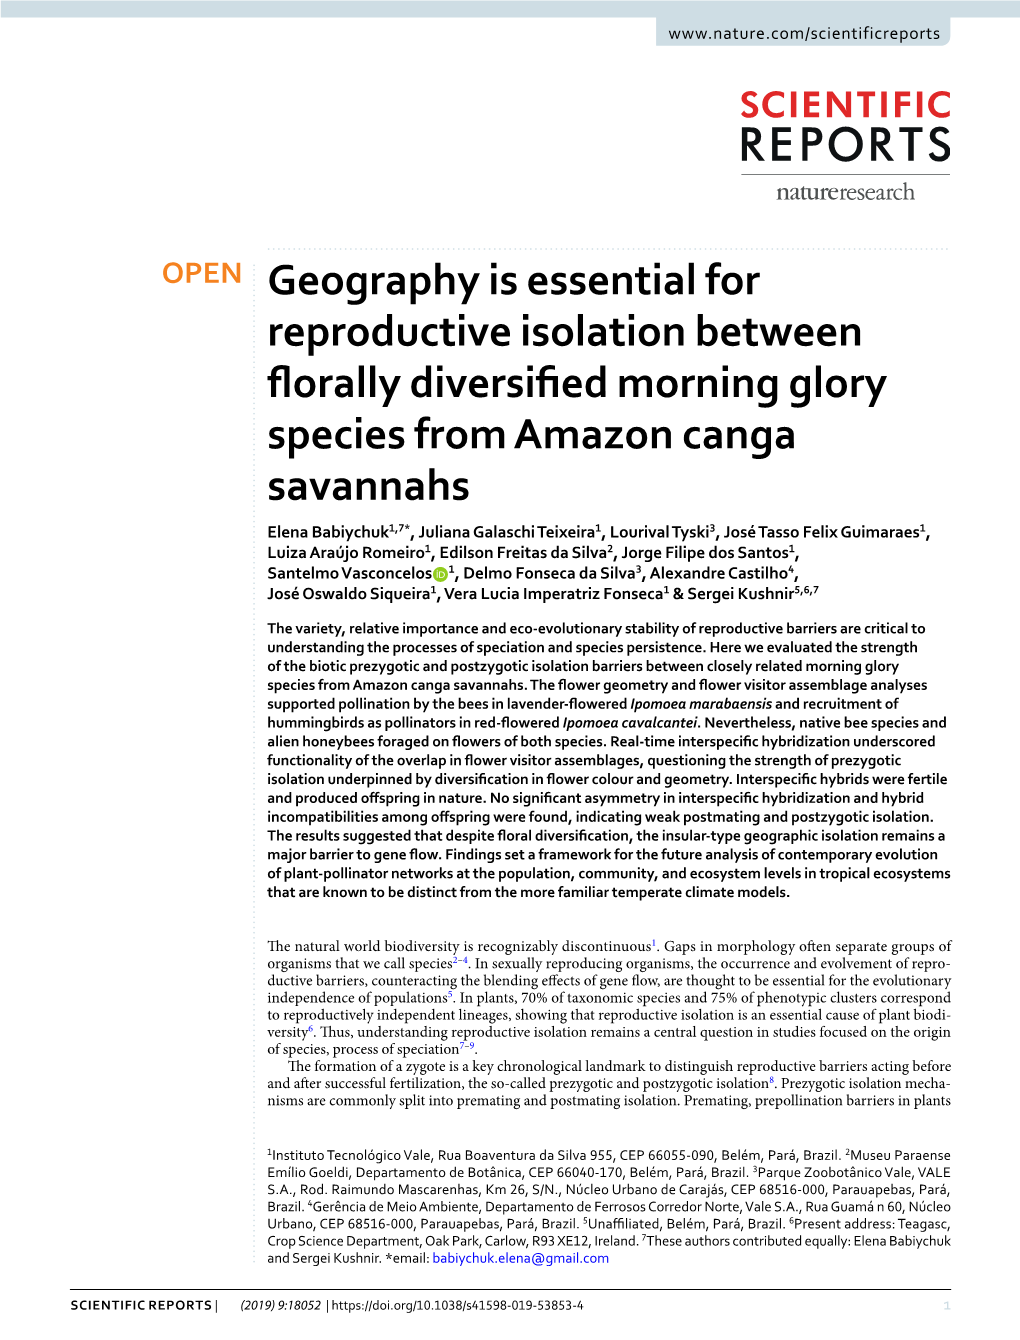 Geography Is Essential for Reproductive Isolation Between